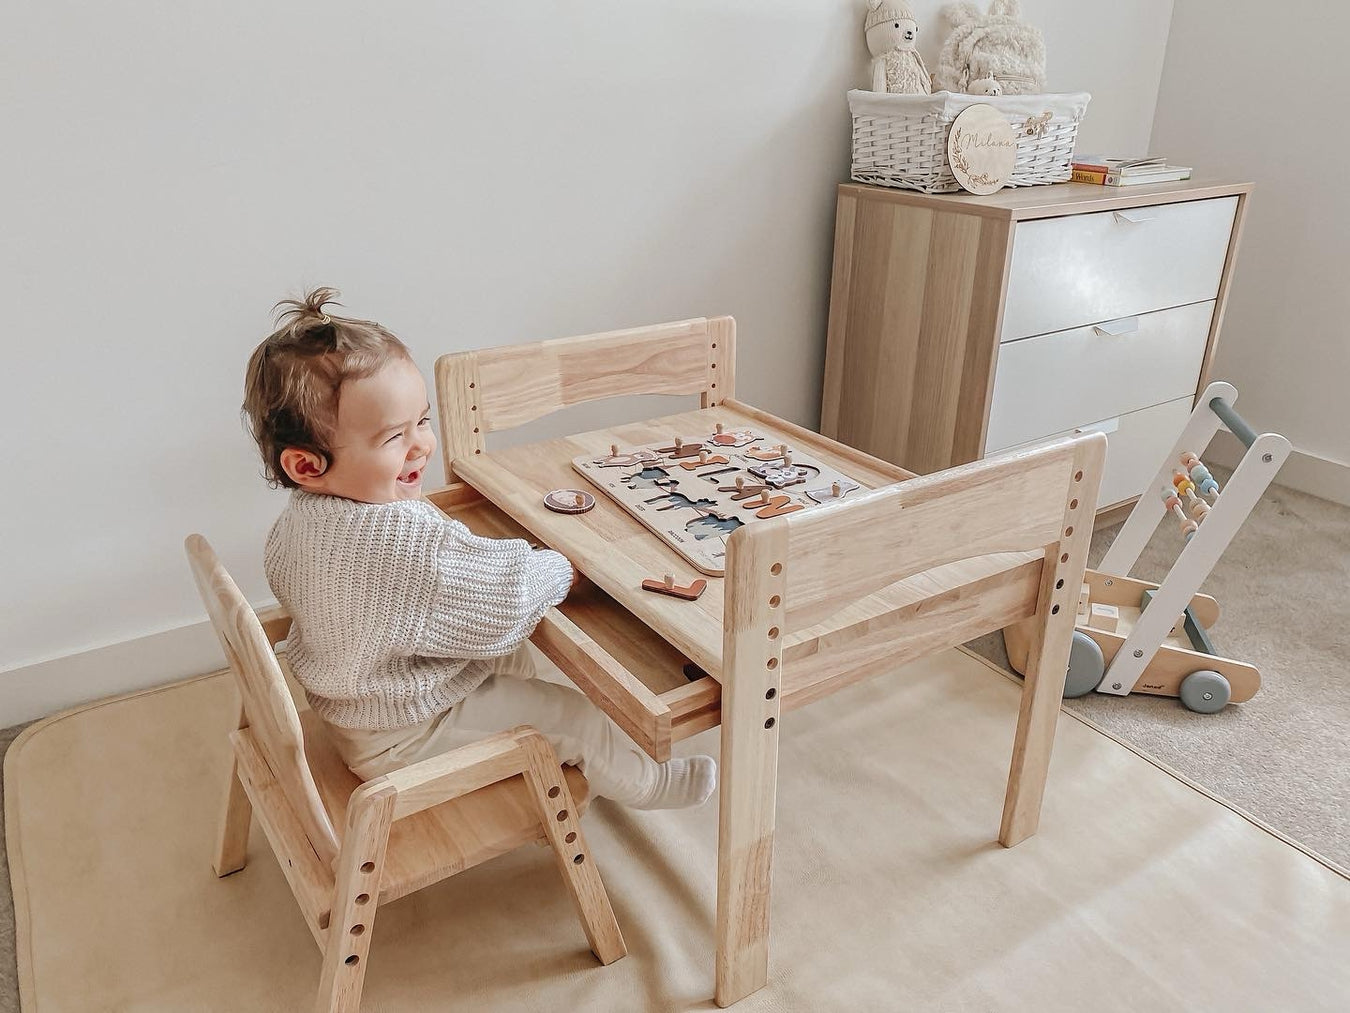 My Duckling Kid’s Tables & Chairs